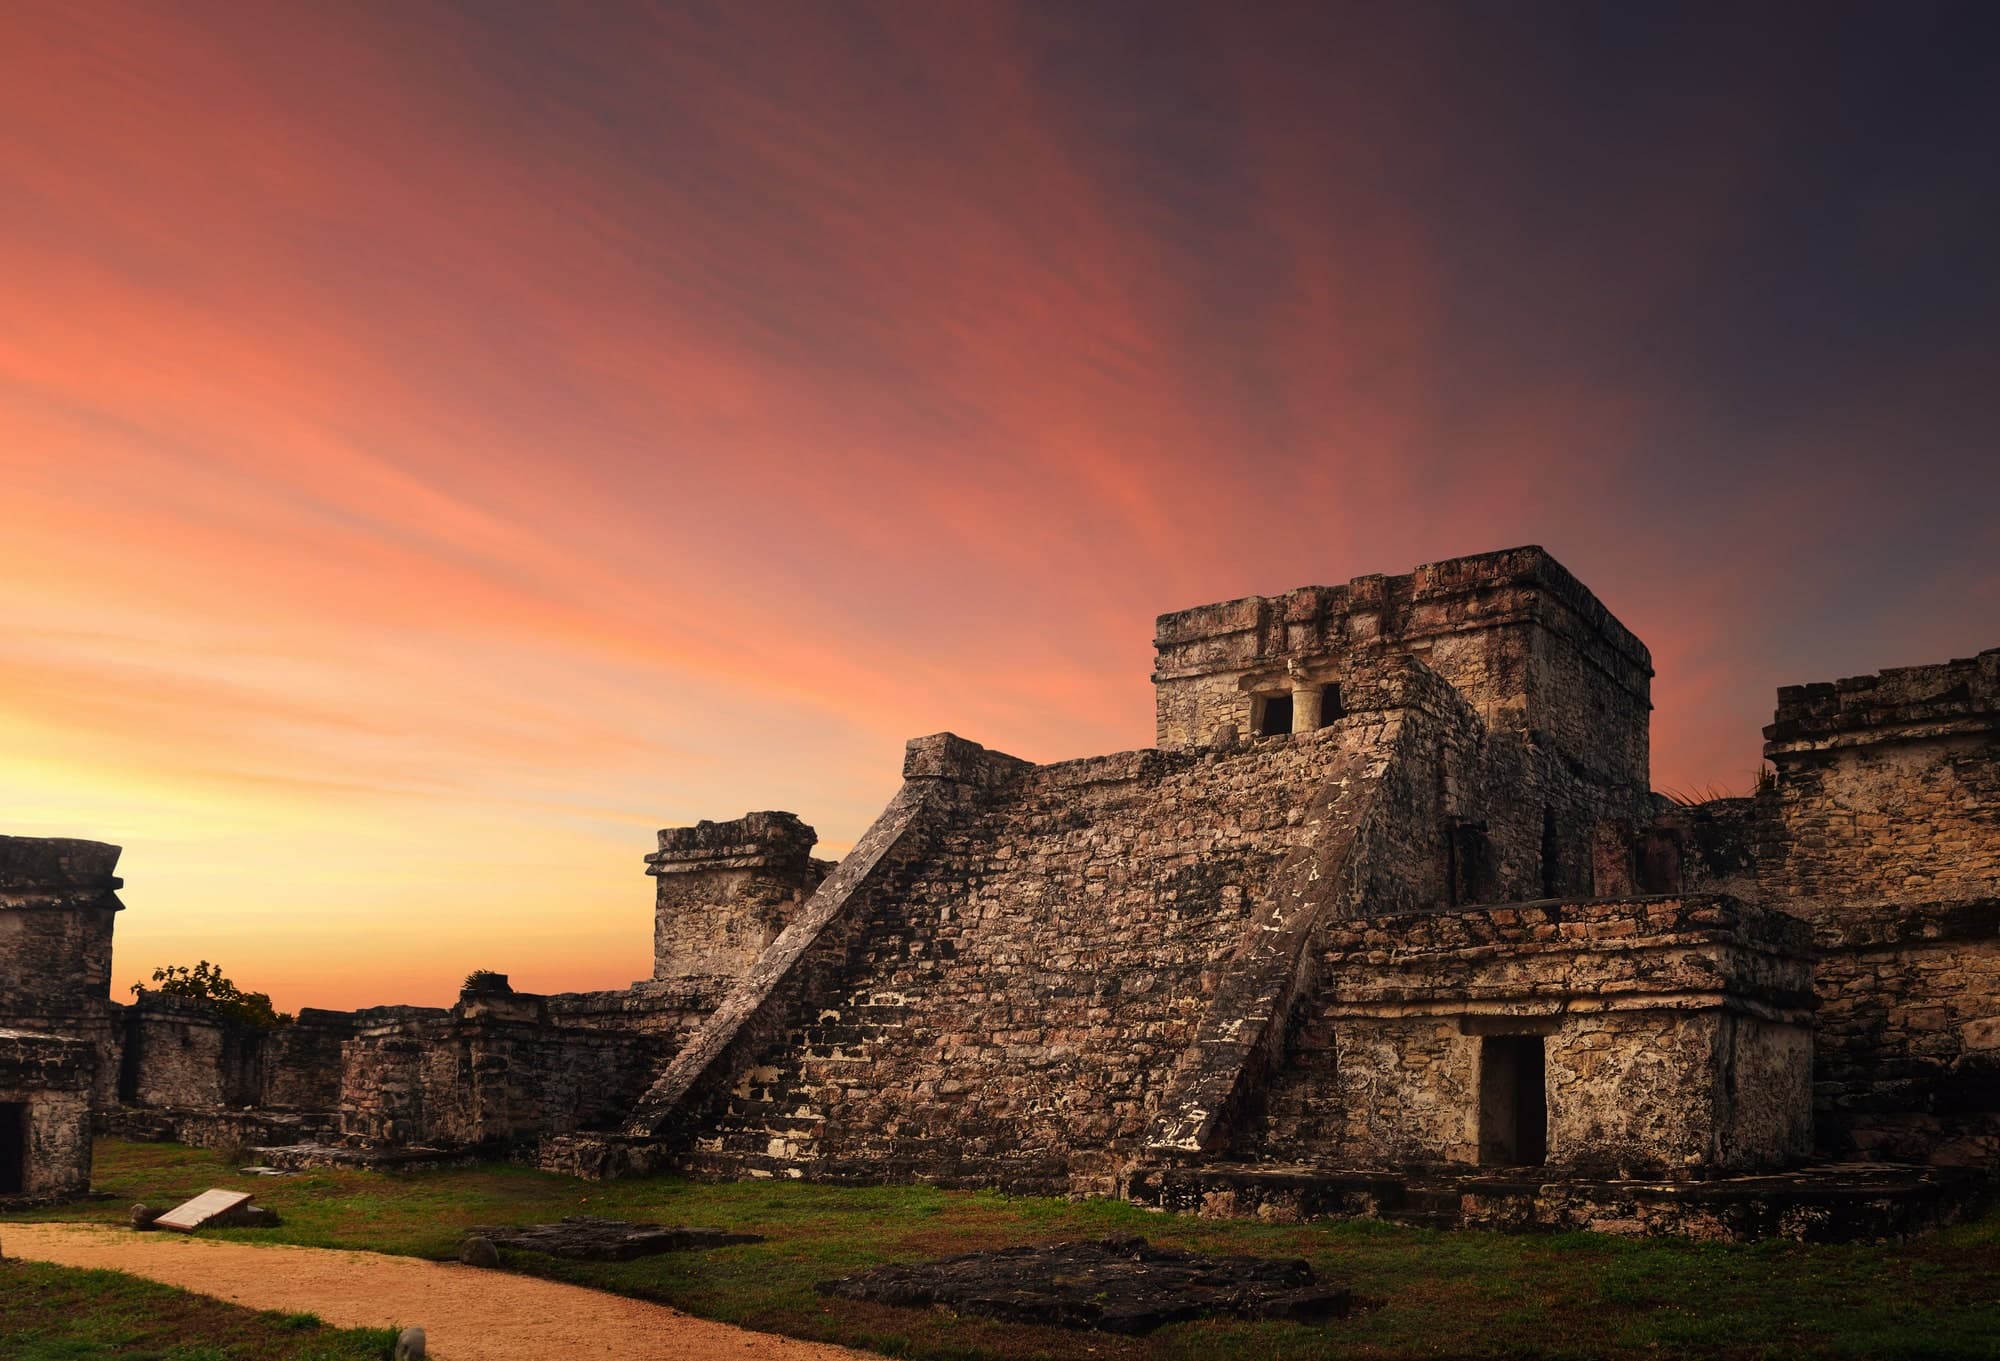 Castillo fortress at sunset in the ancient Mayan city of Tulum.